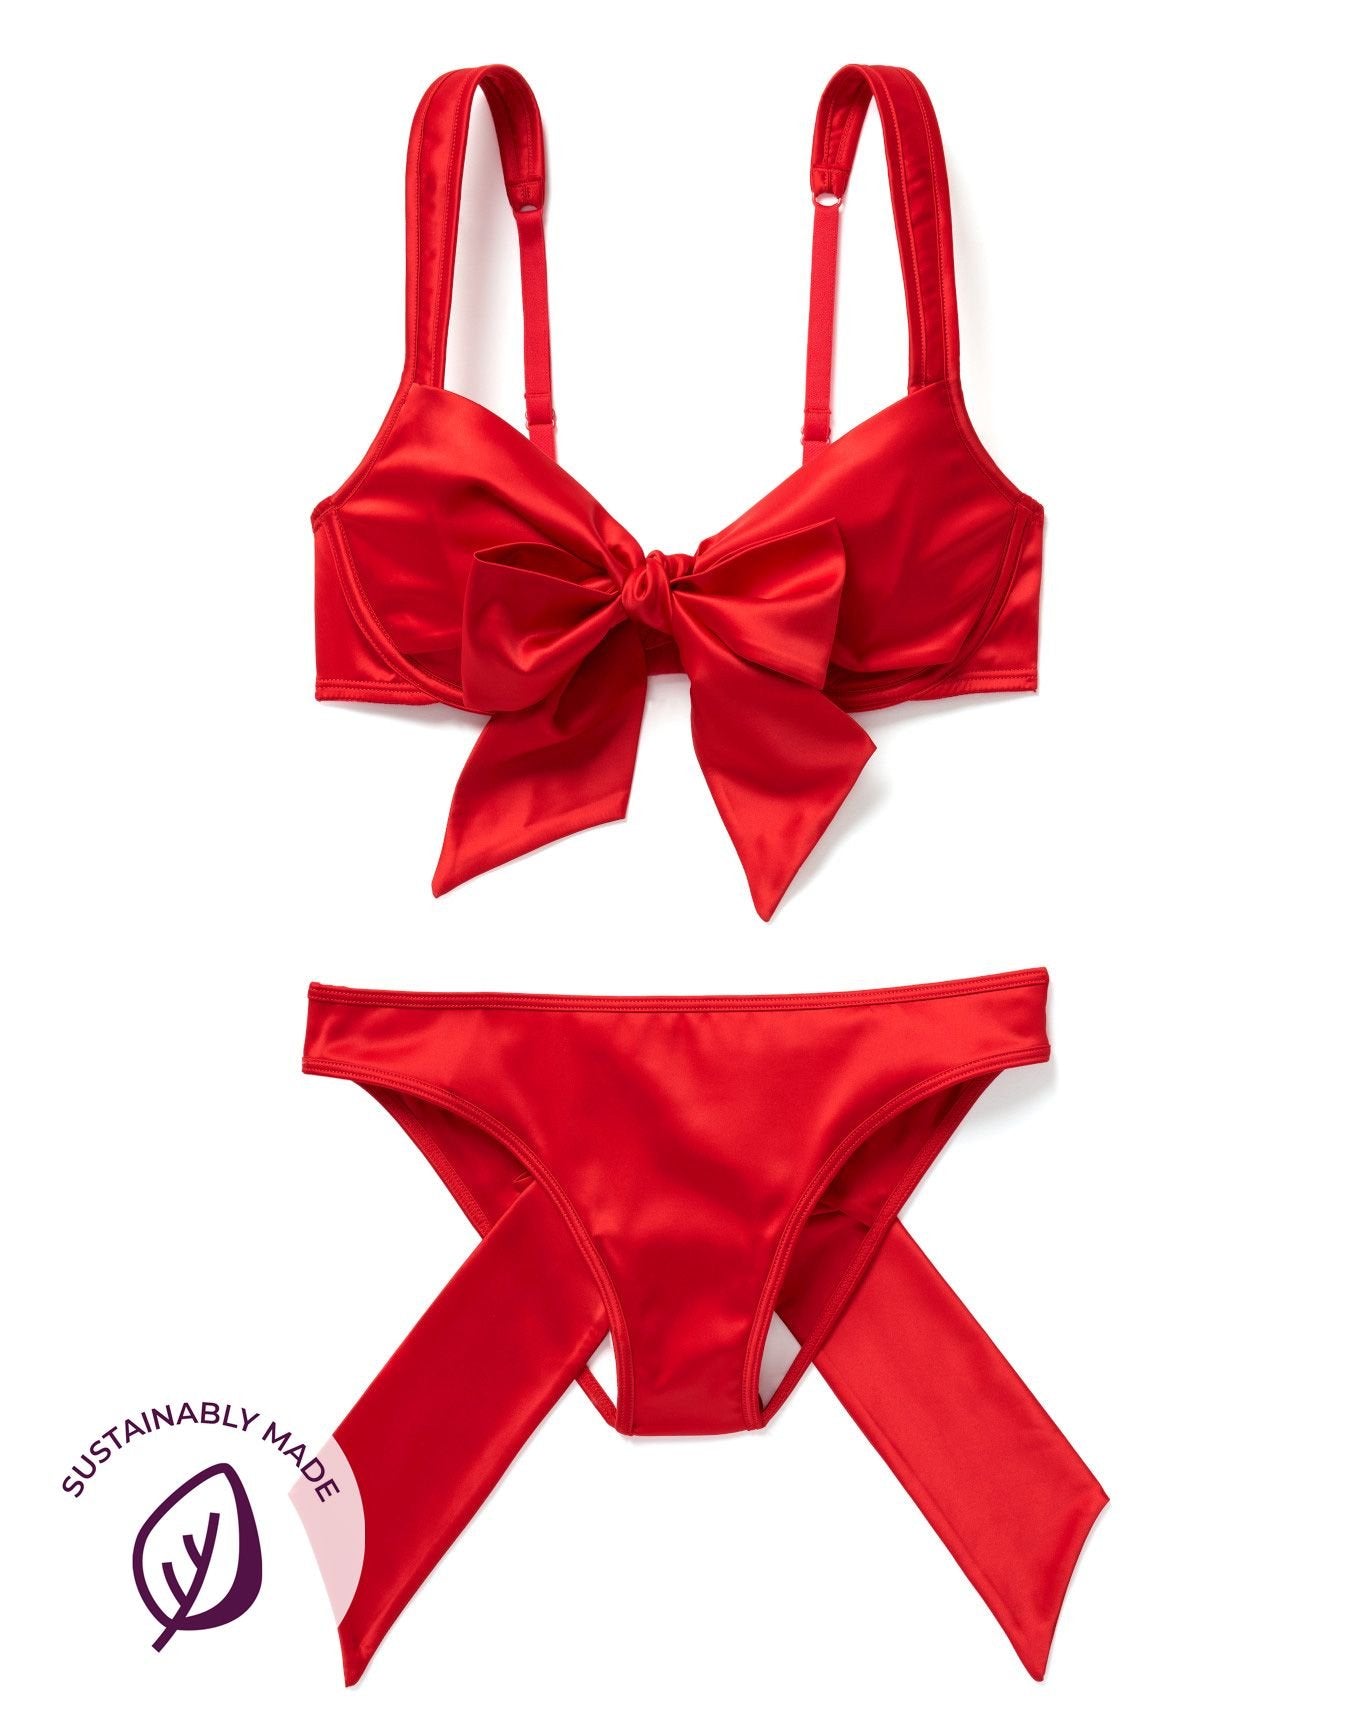 Adore Me Gynger Unlined Balconette in color True Red and shape quarter cup